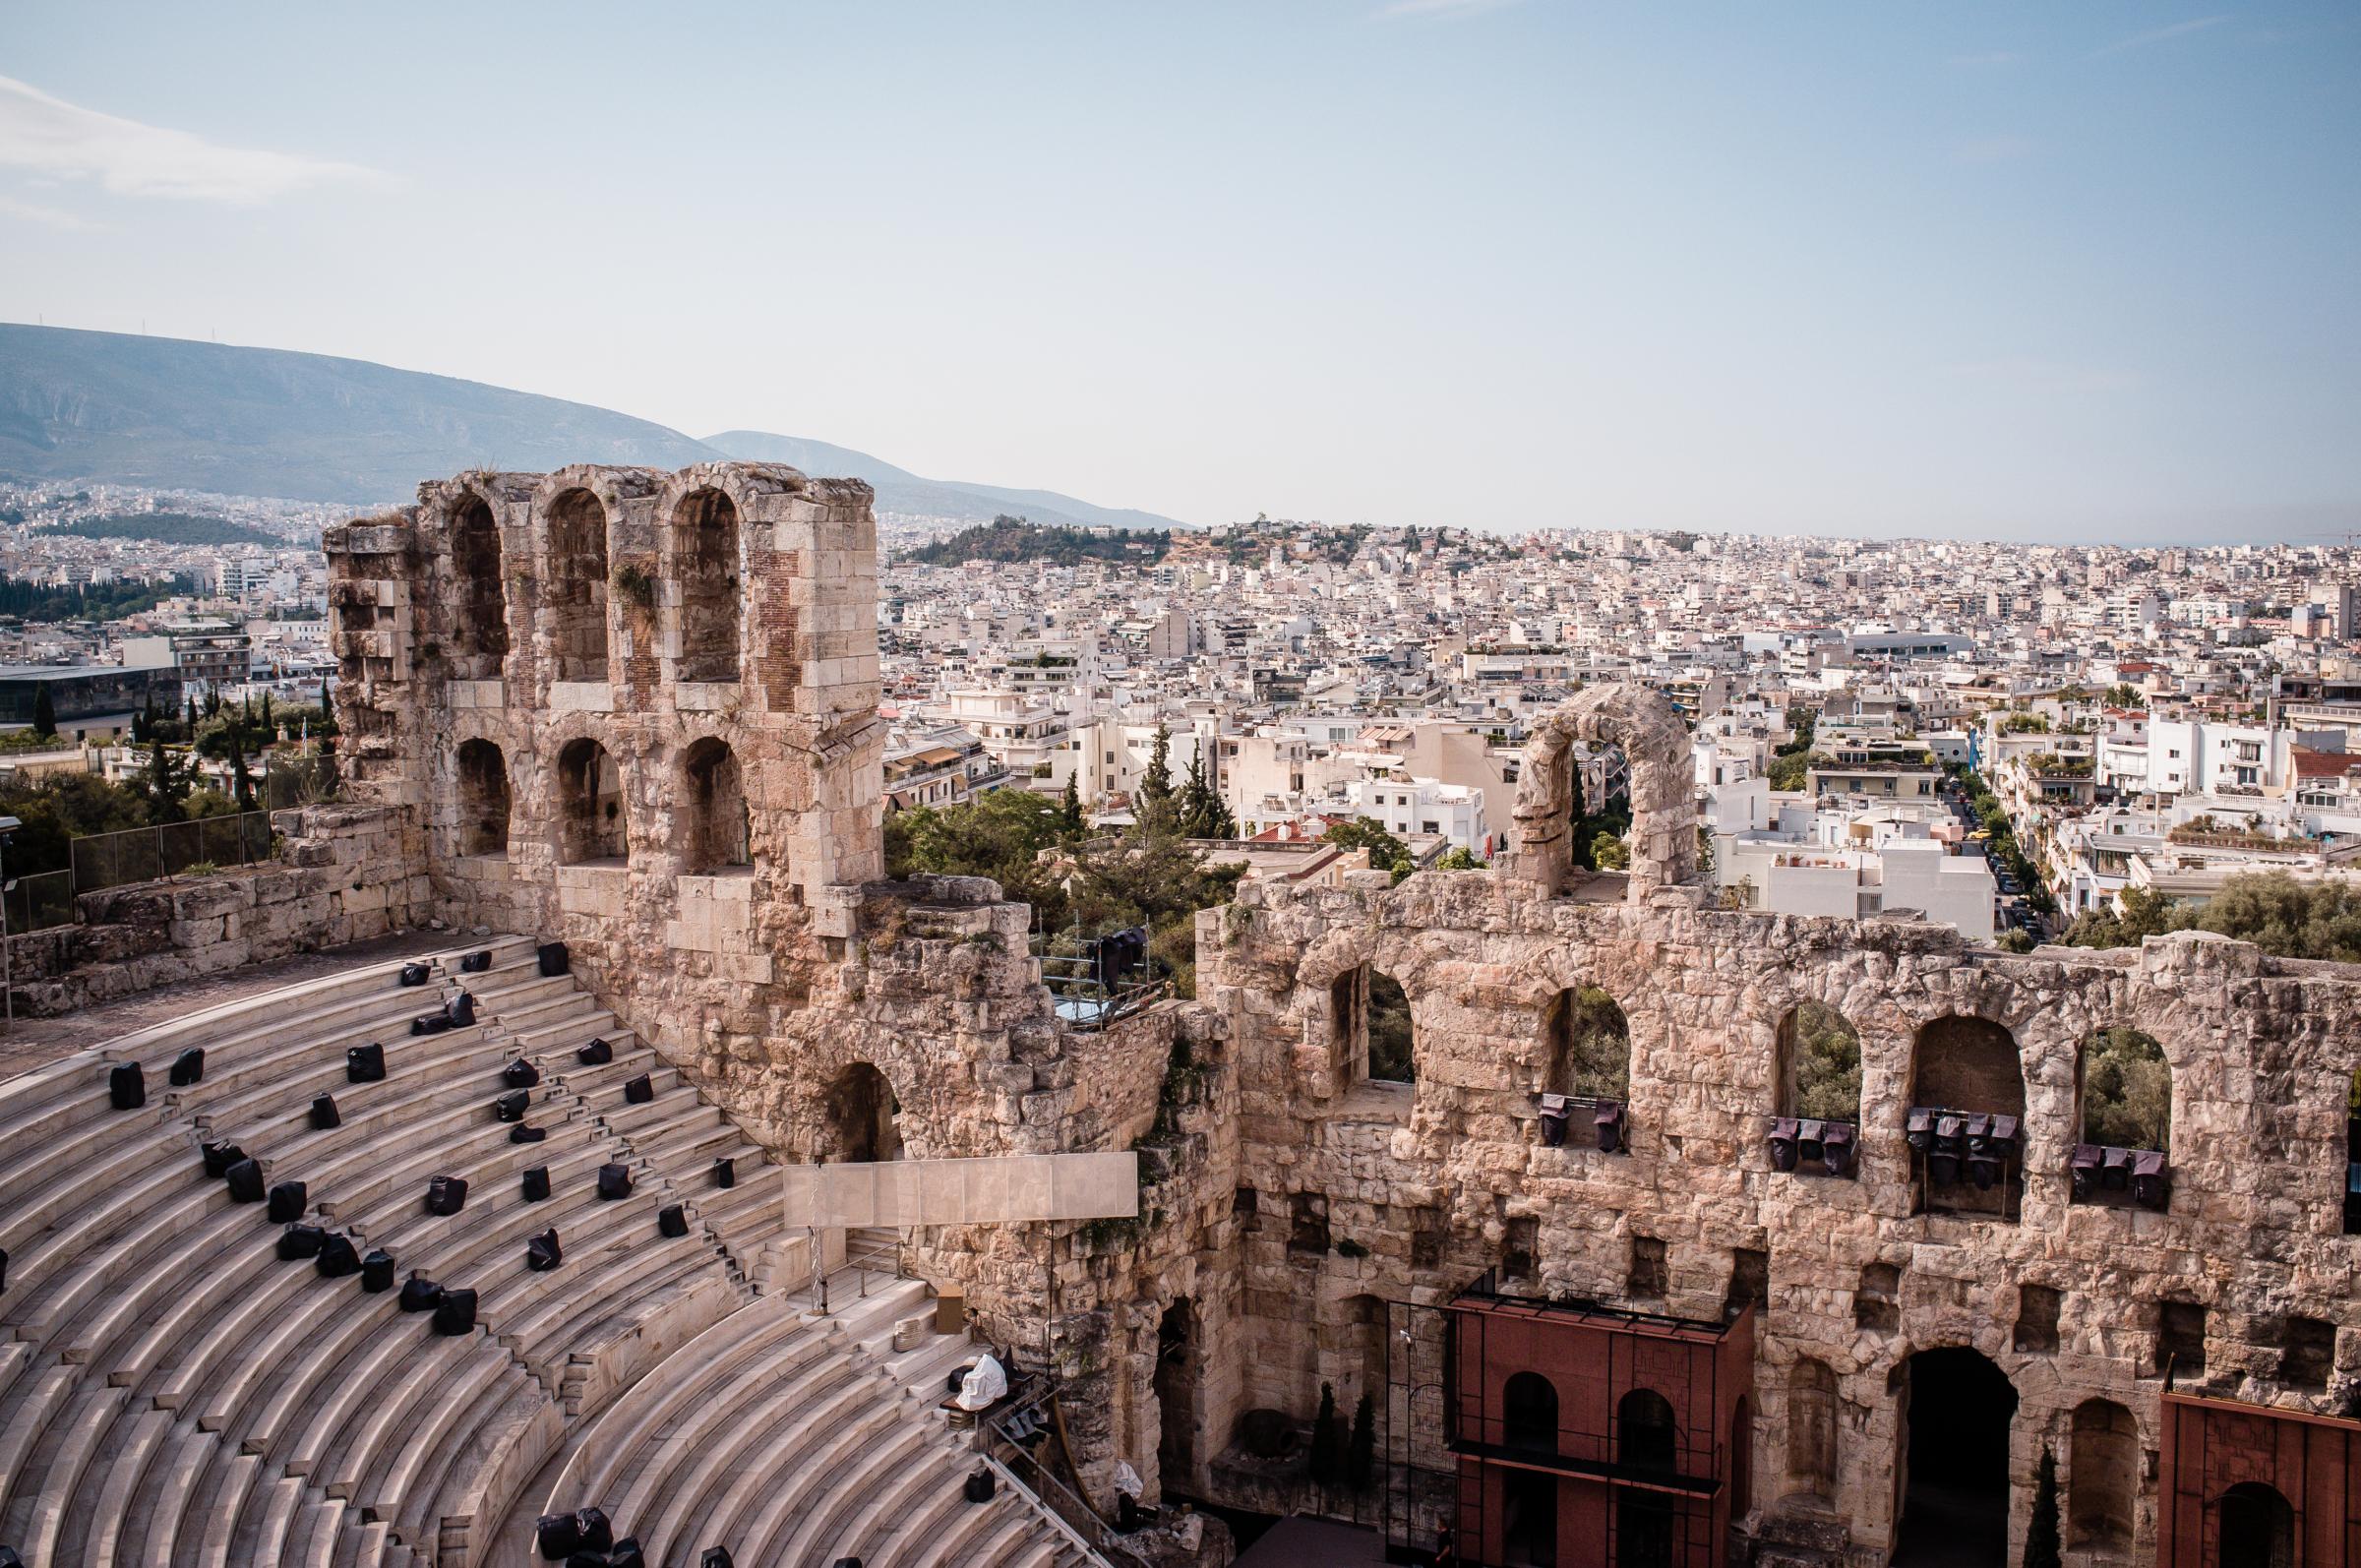 acropolis - The Odeon of Herodes Atticus, is a stone Roman theatre...